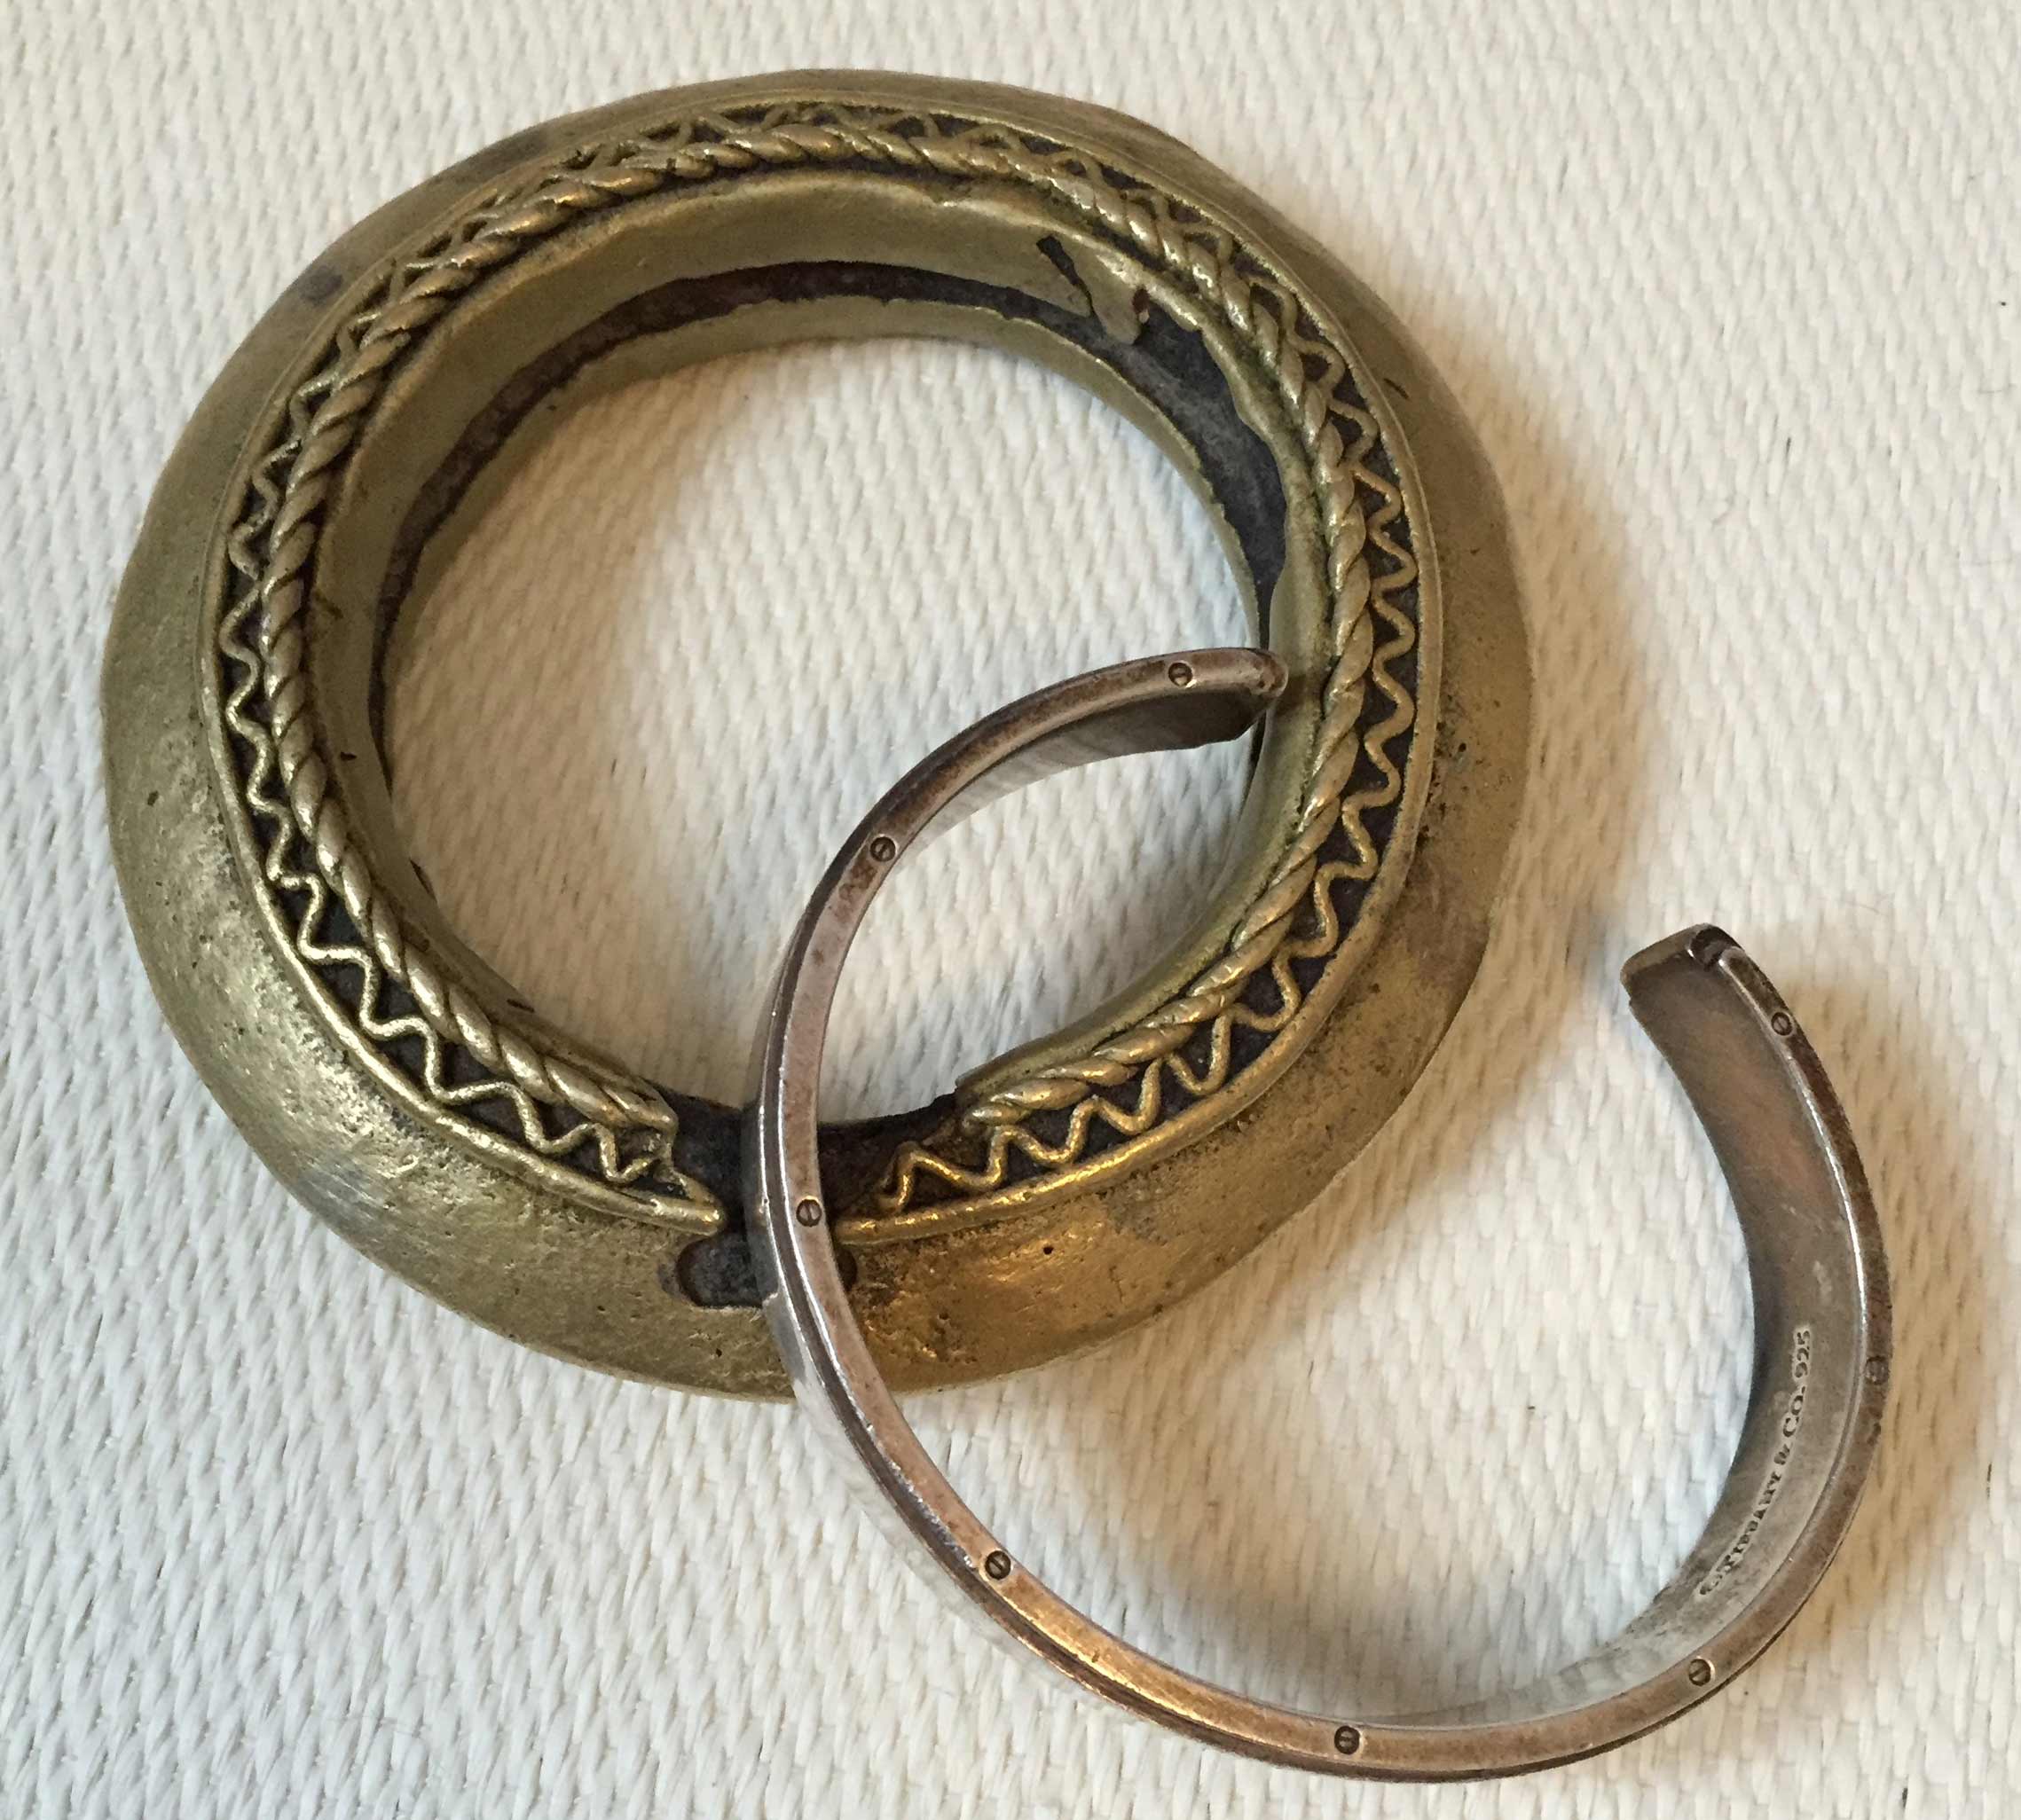 are these bracelets made from gold and silver or brass and plate?